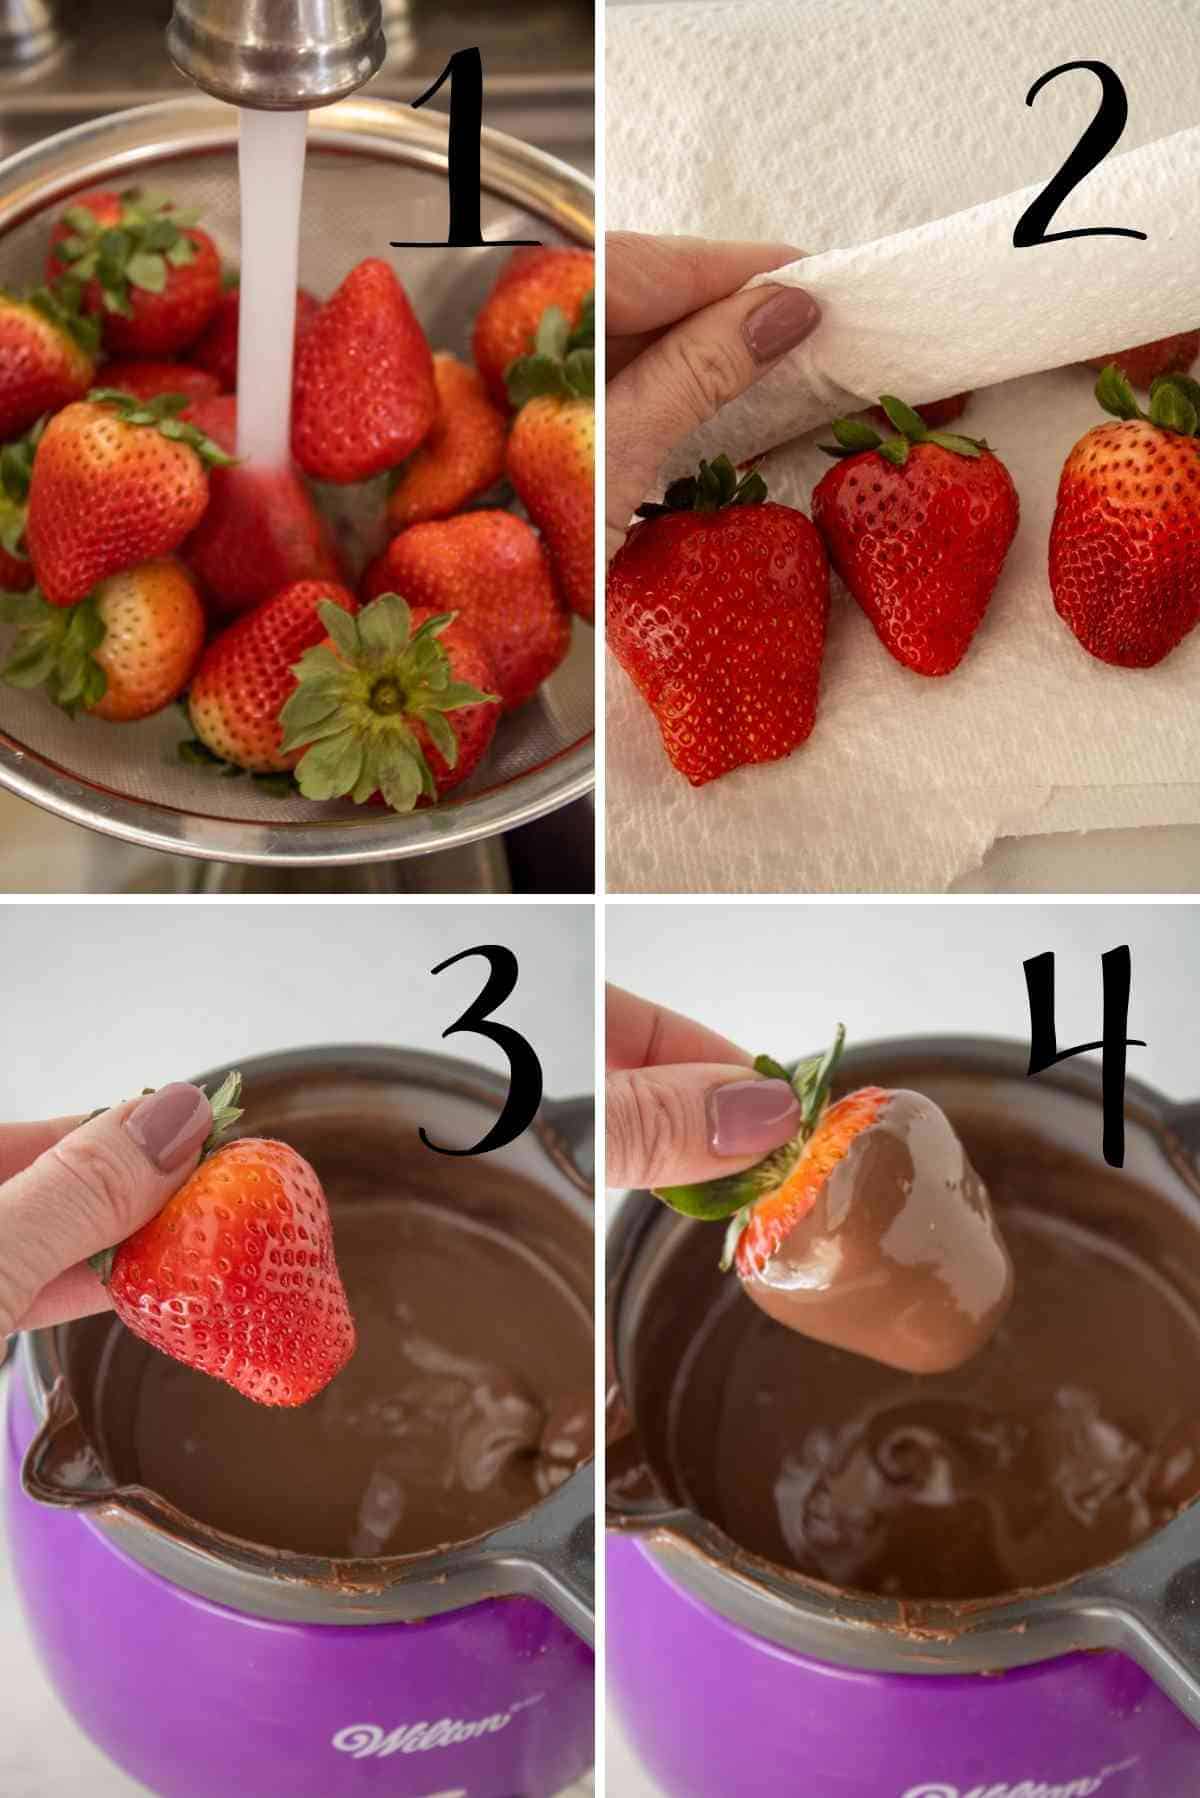 Wash and dry strawberries before dipping in chocolate coating!